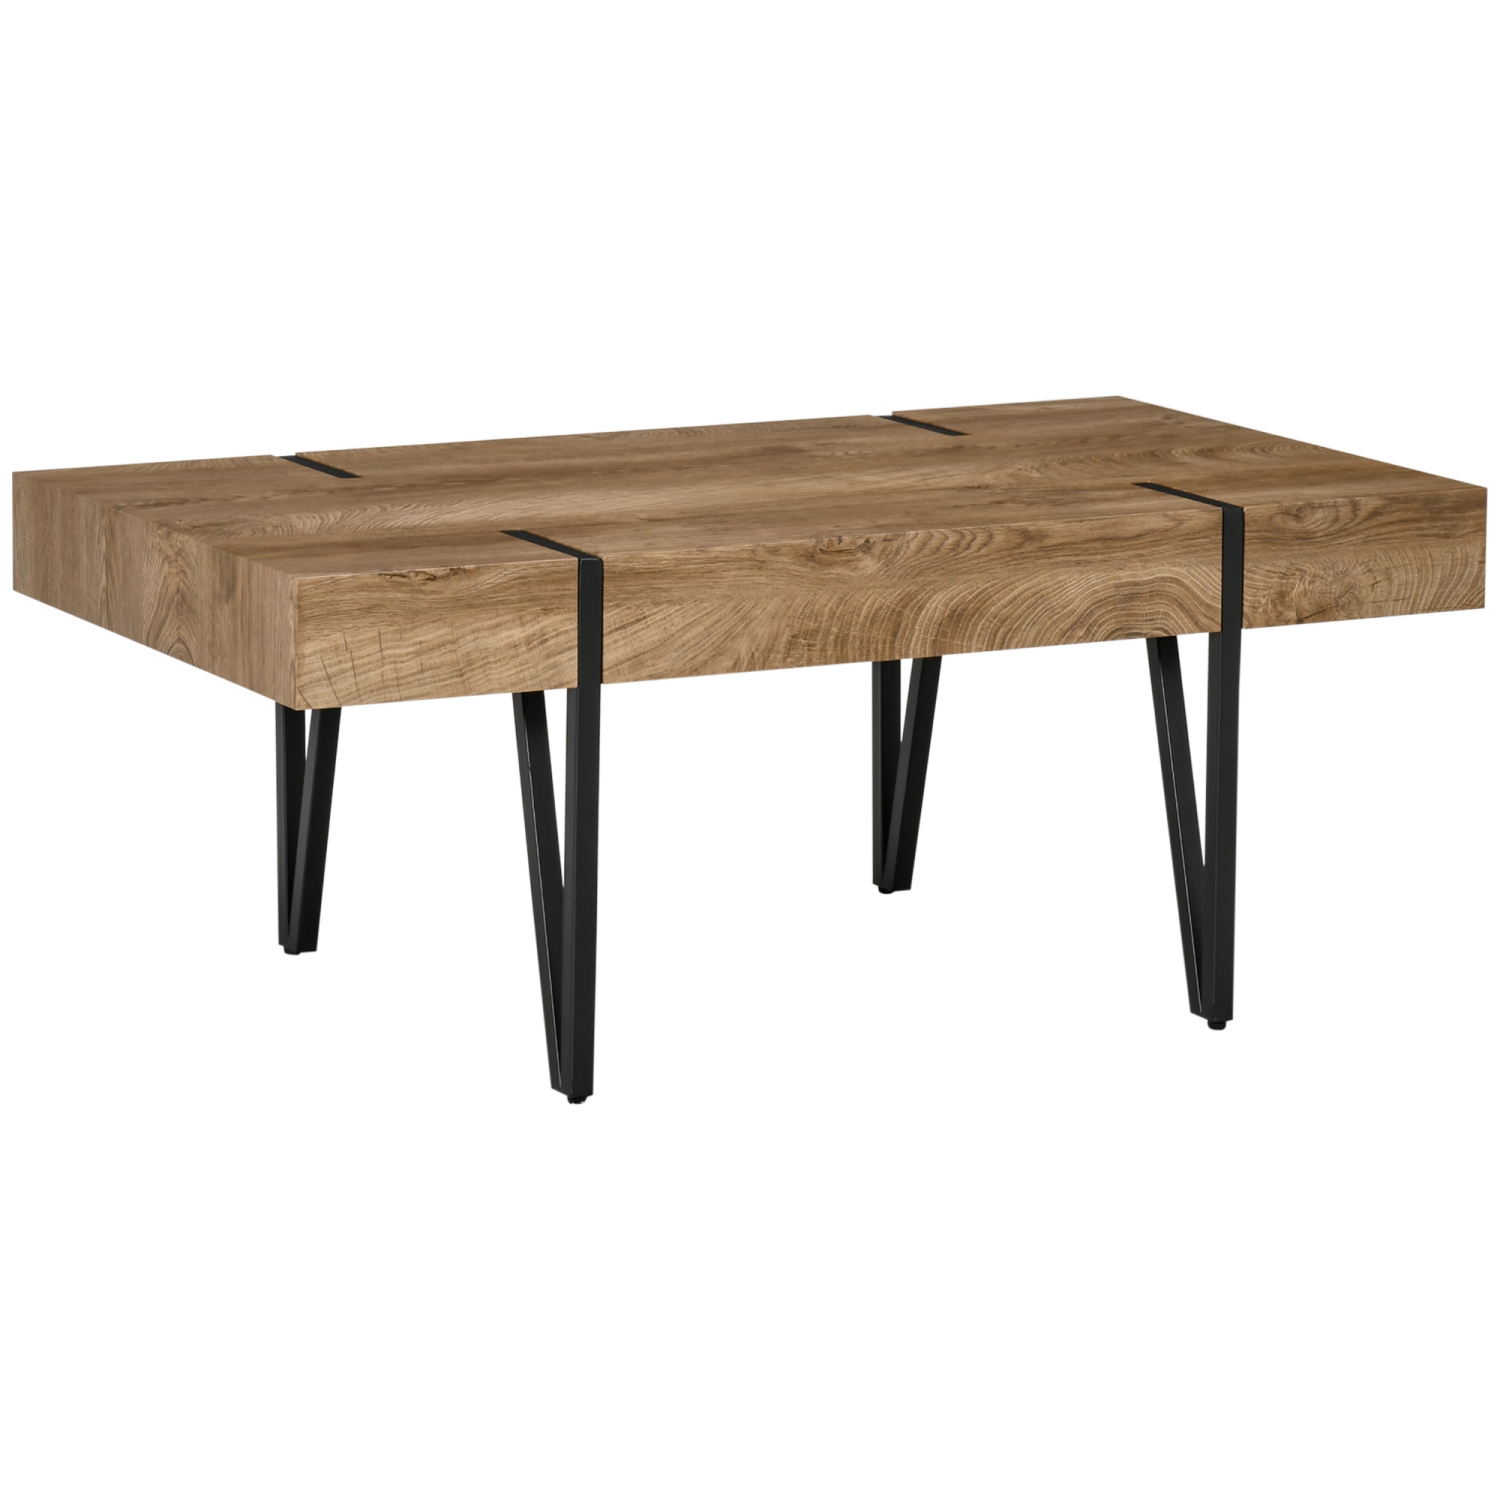 HOMCOM Rustic Coffee Table, Rectangle Nature Cocktail Table with Steel Hairpin Legs for Living Room